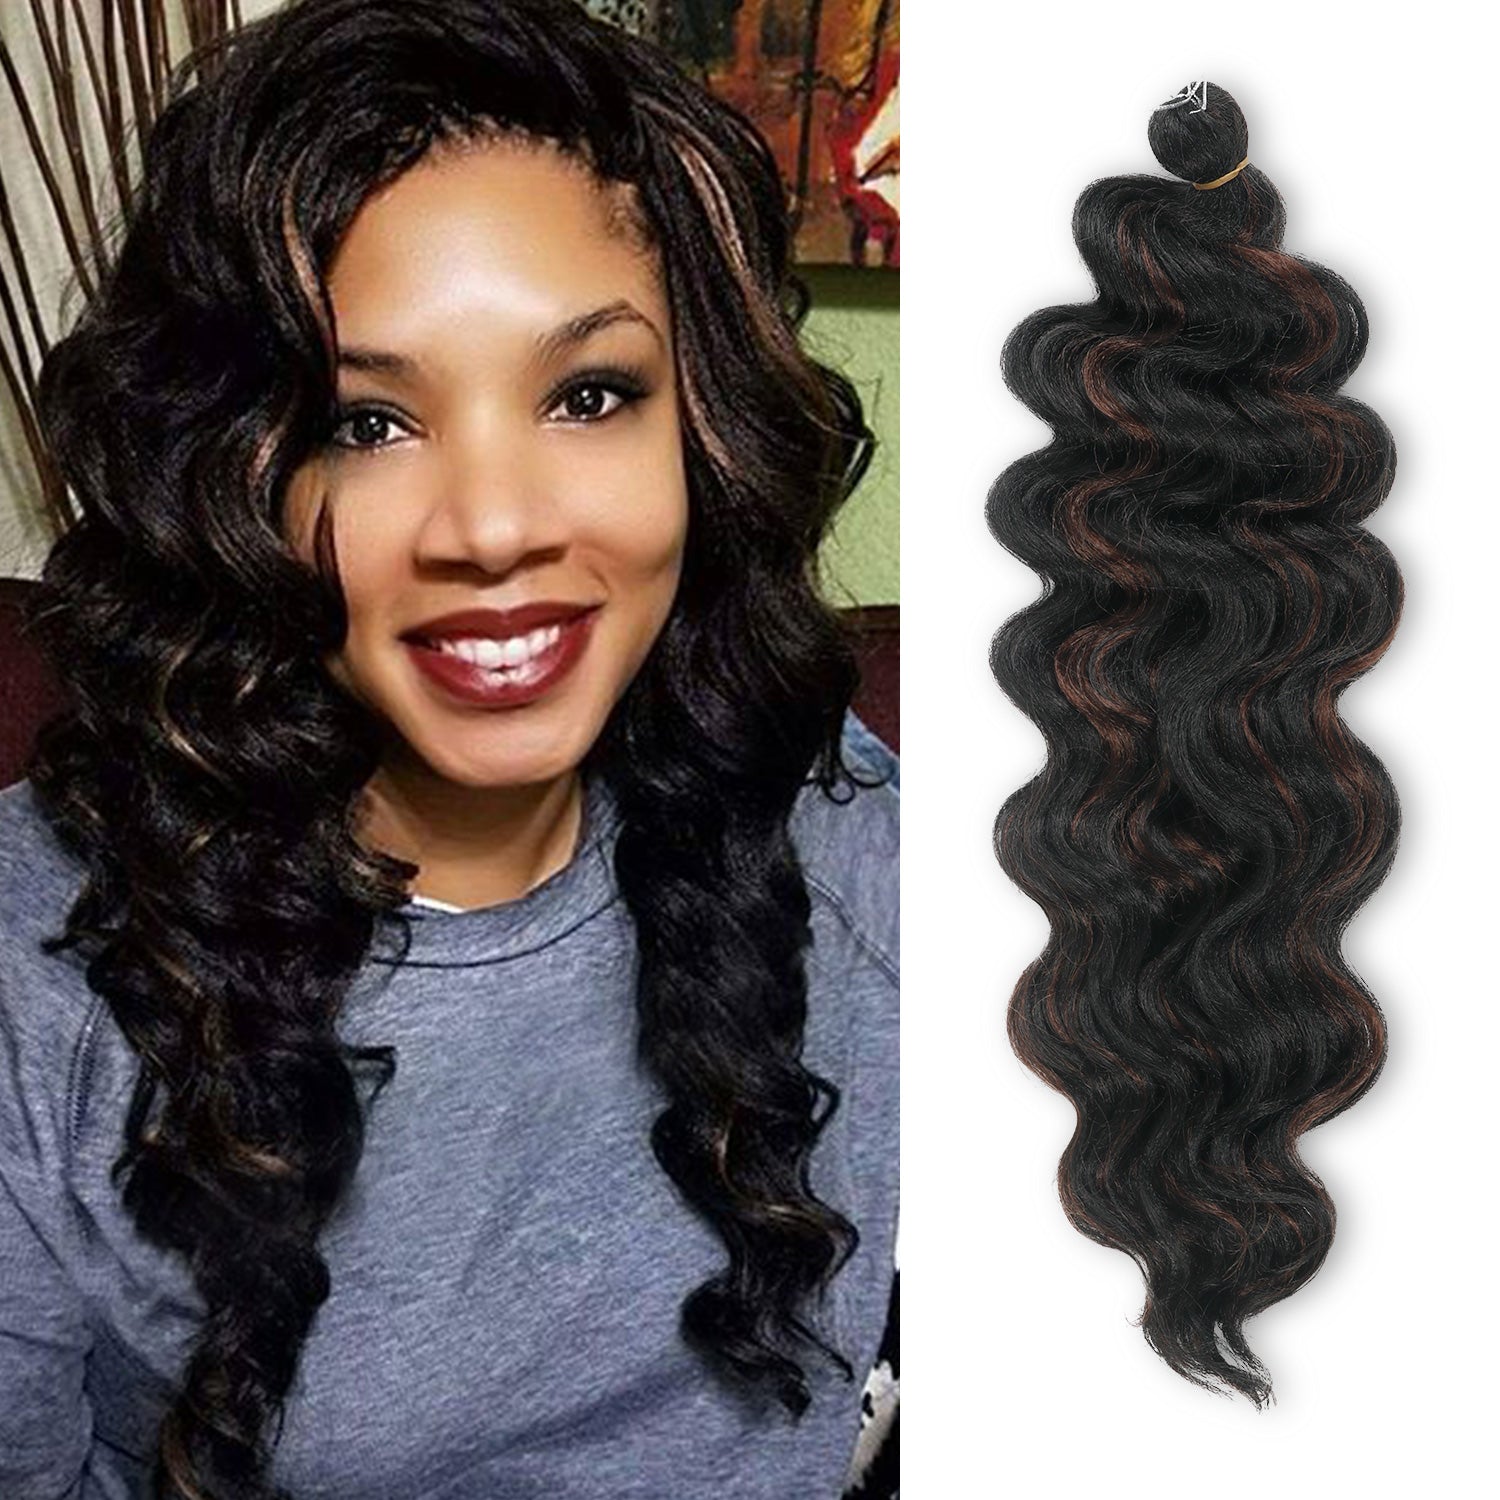 Authentic Synthetic Hair Crochet Braids 6X Value Pack Ocean Wave 20"